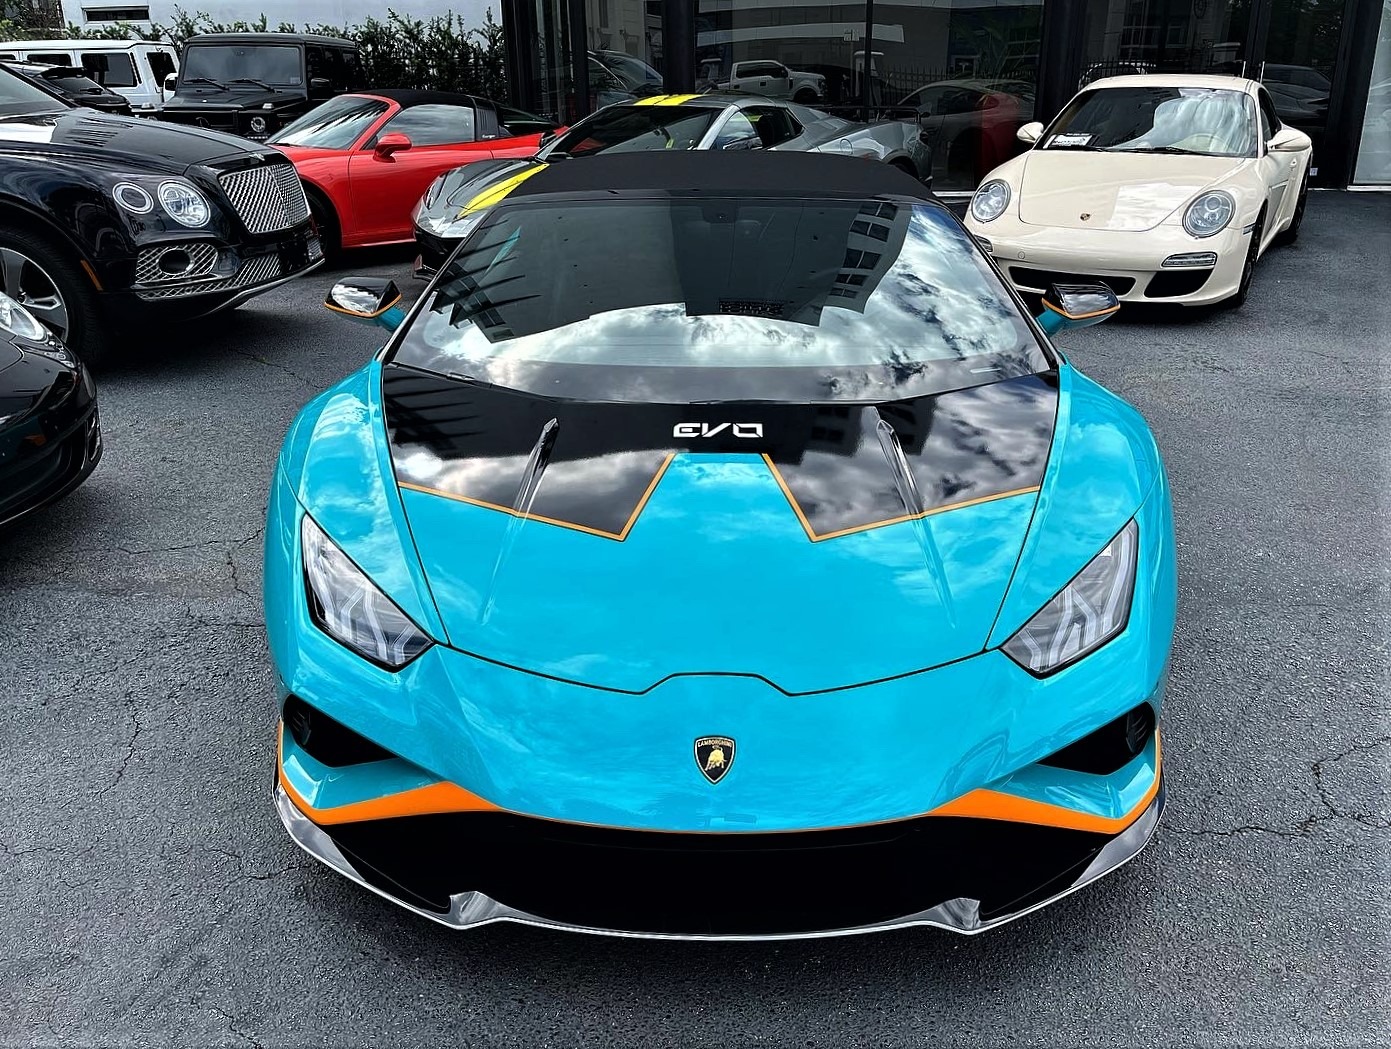 Used 2021 Lamborghini Huracan LP 610-4 EVO Spyder for sale Call for price at The Gables Sports Cars in Miami FL 33146 2